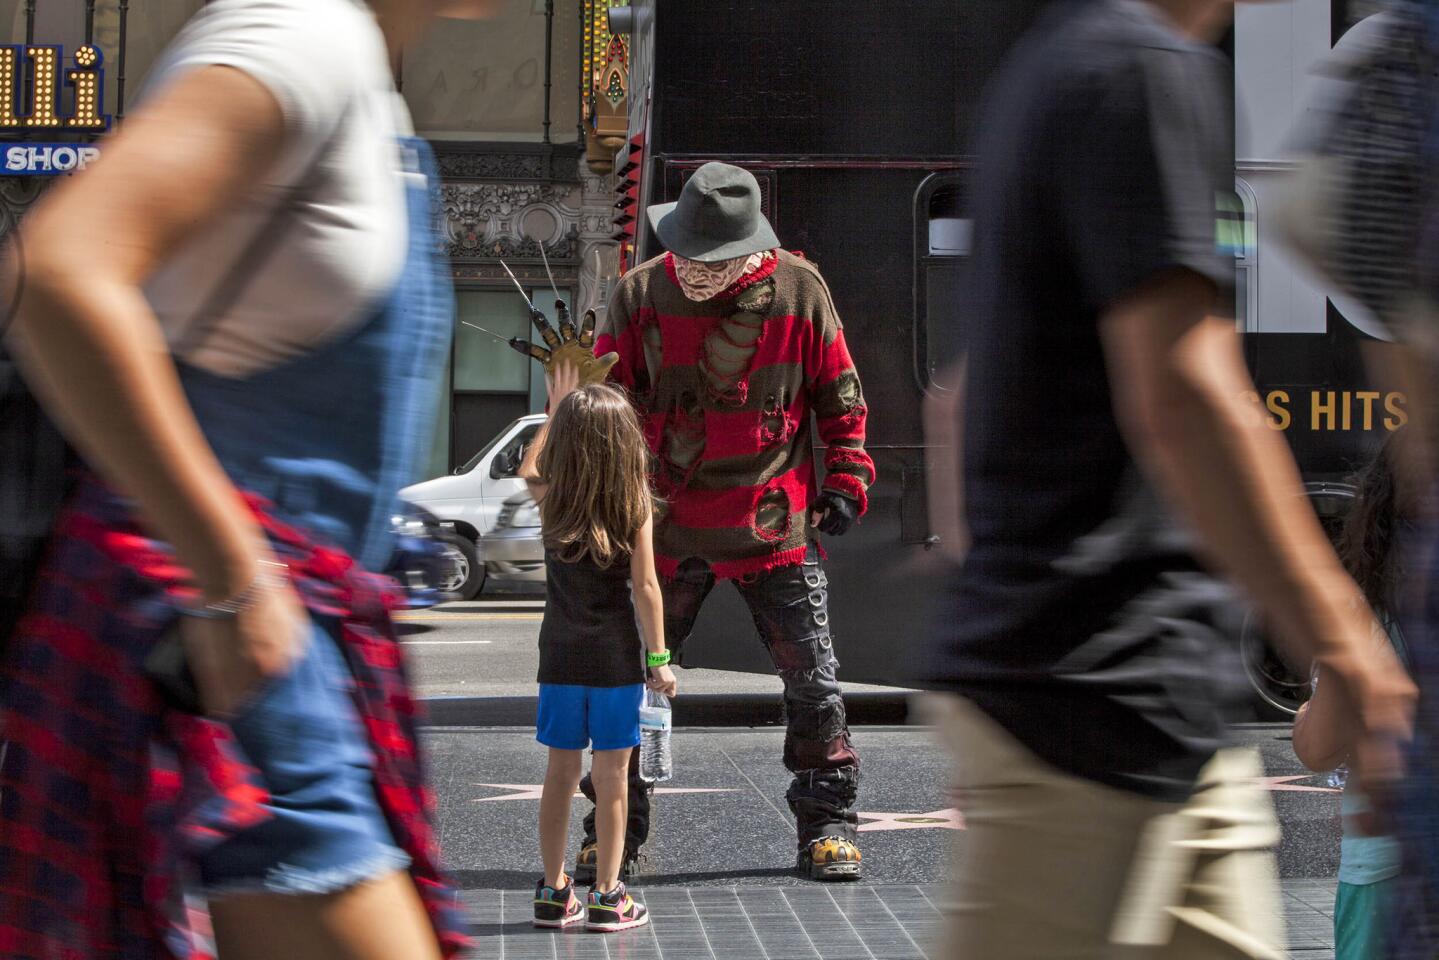 A Freddy Krueger performer greets 7-year-old Zoey Delao of El Paso, Texas, on Hollywood Boulevard during her vacation with her family.